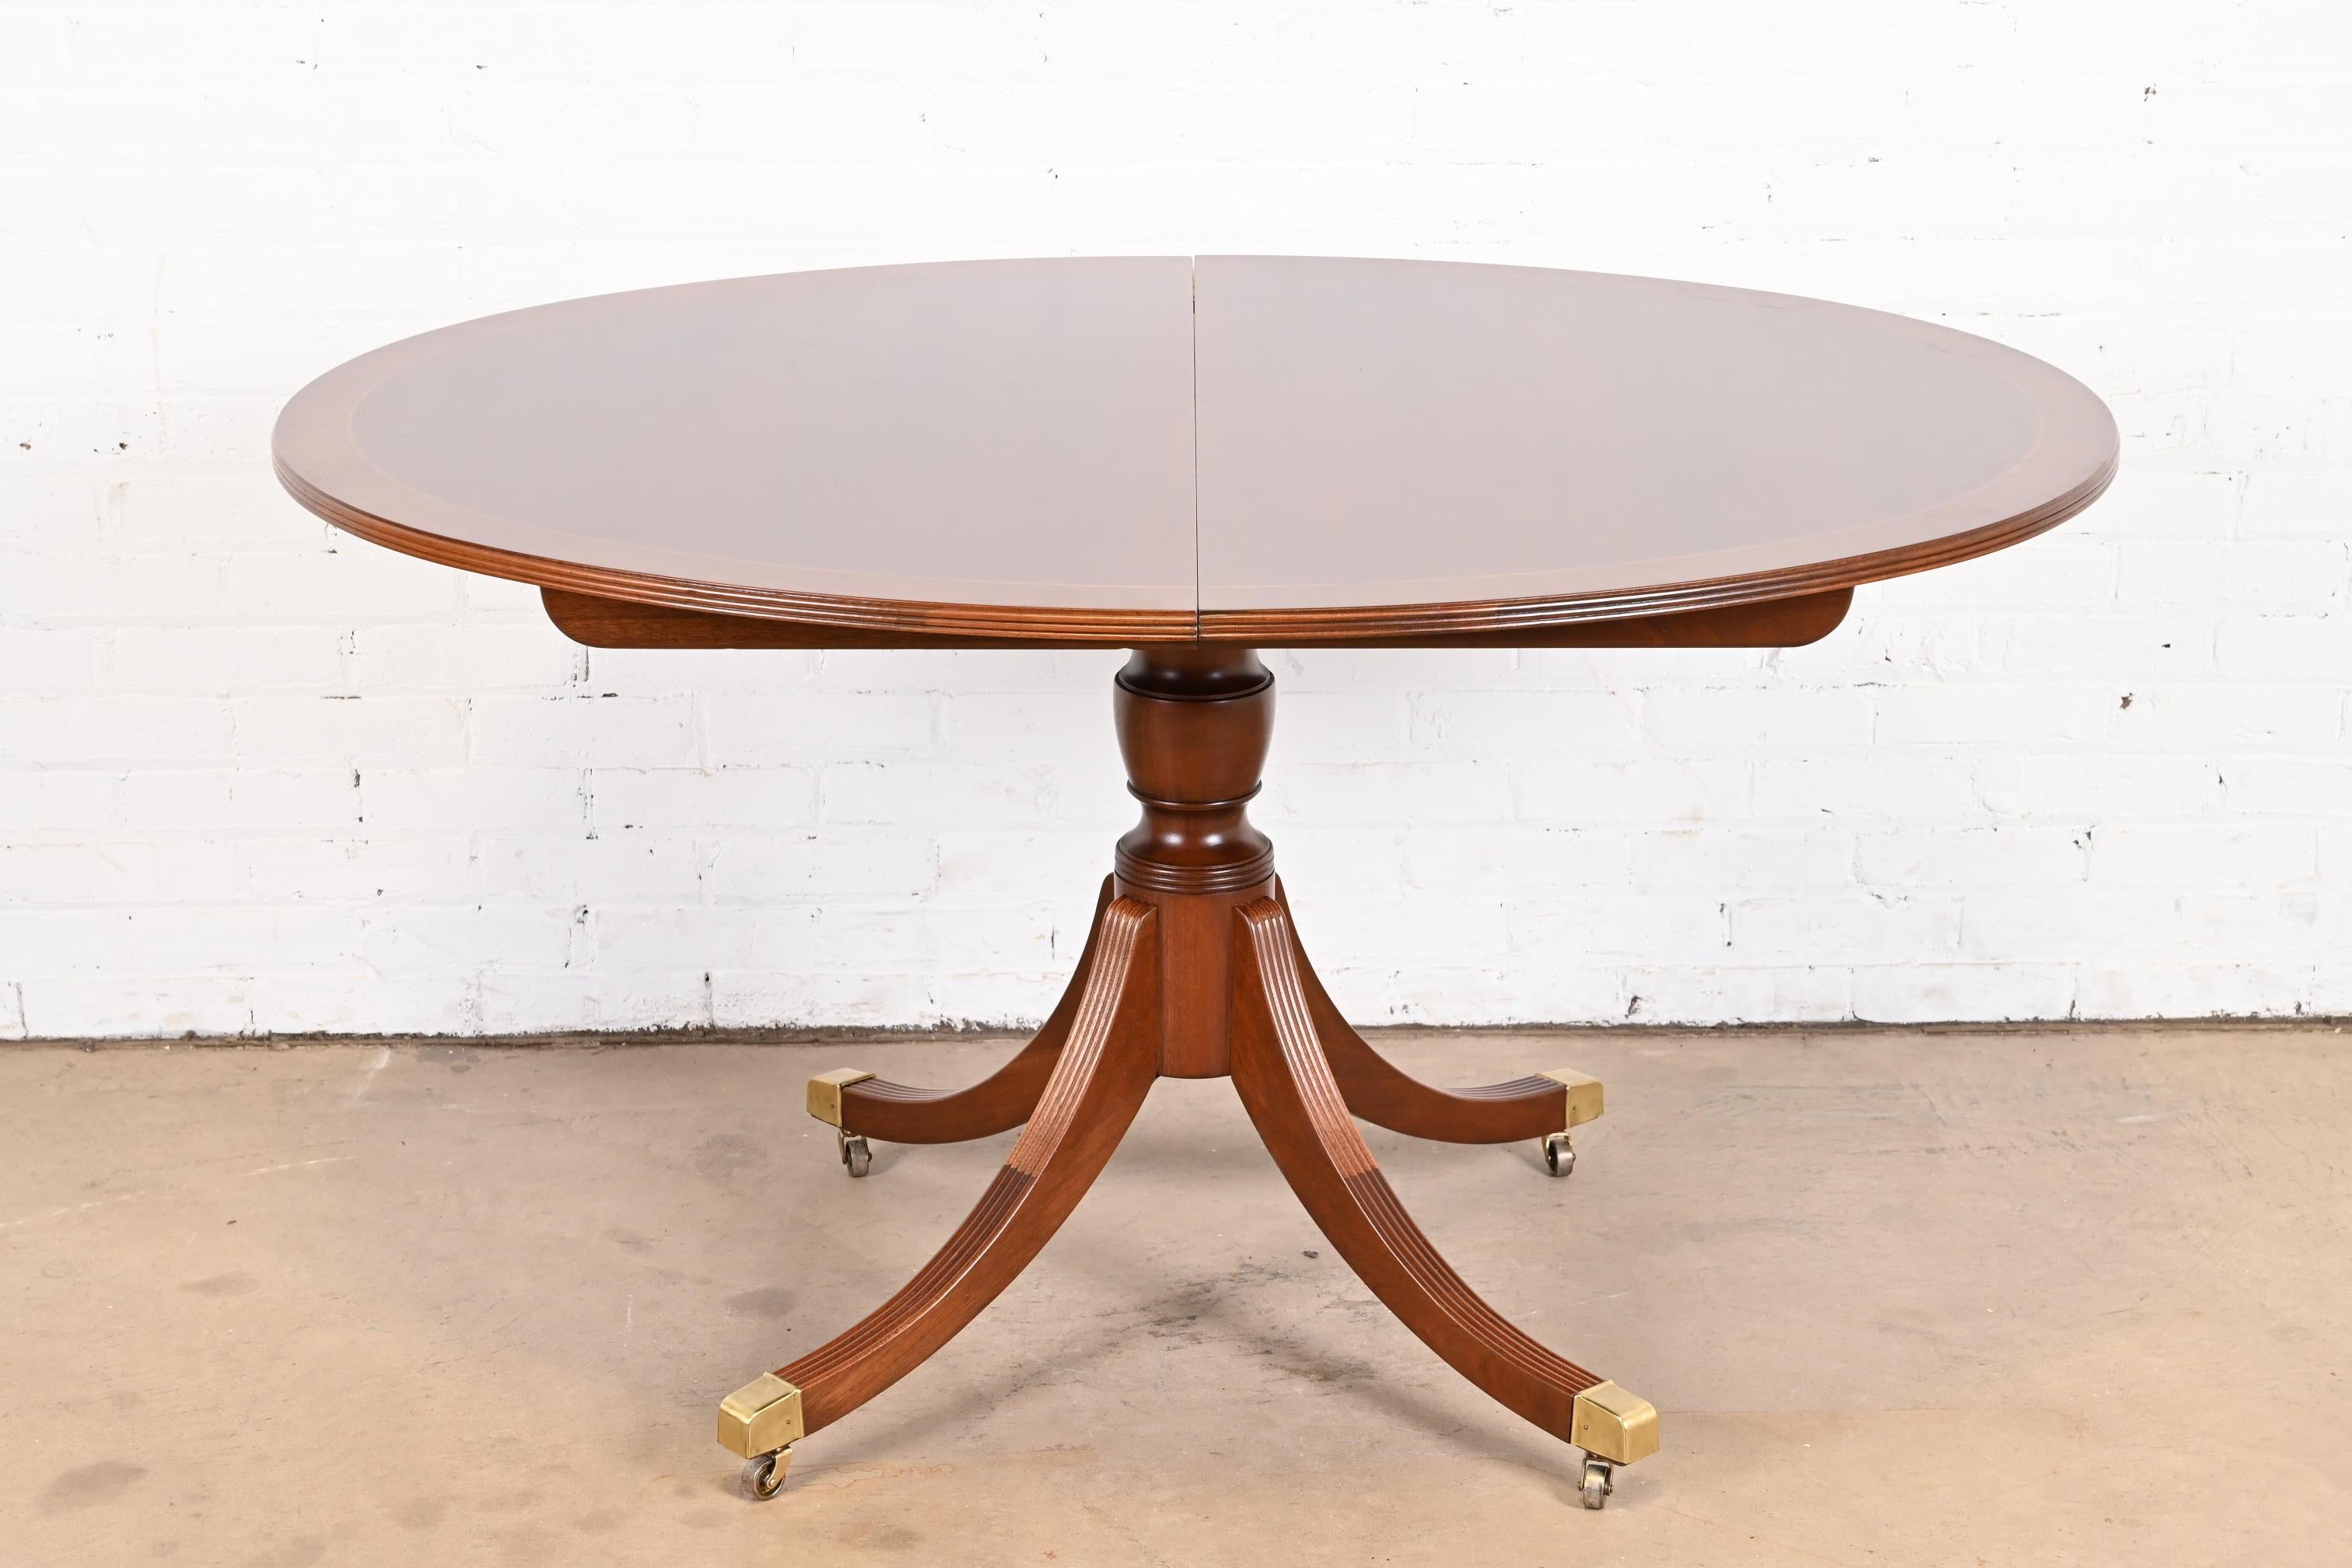 An exceptional Georgian or Regency style pedestal extension dining table

By Baker Furniture, 